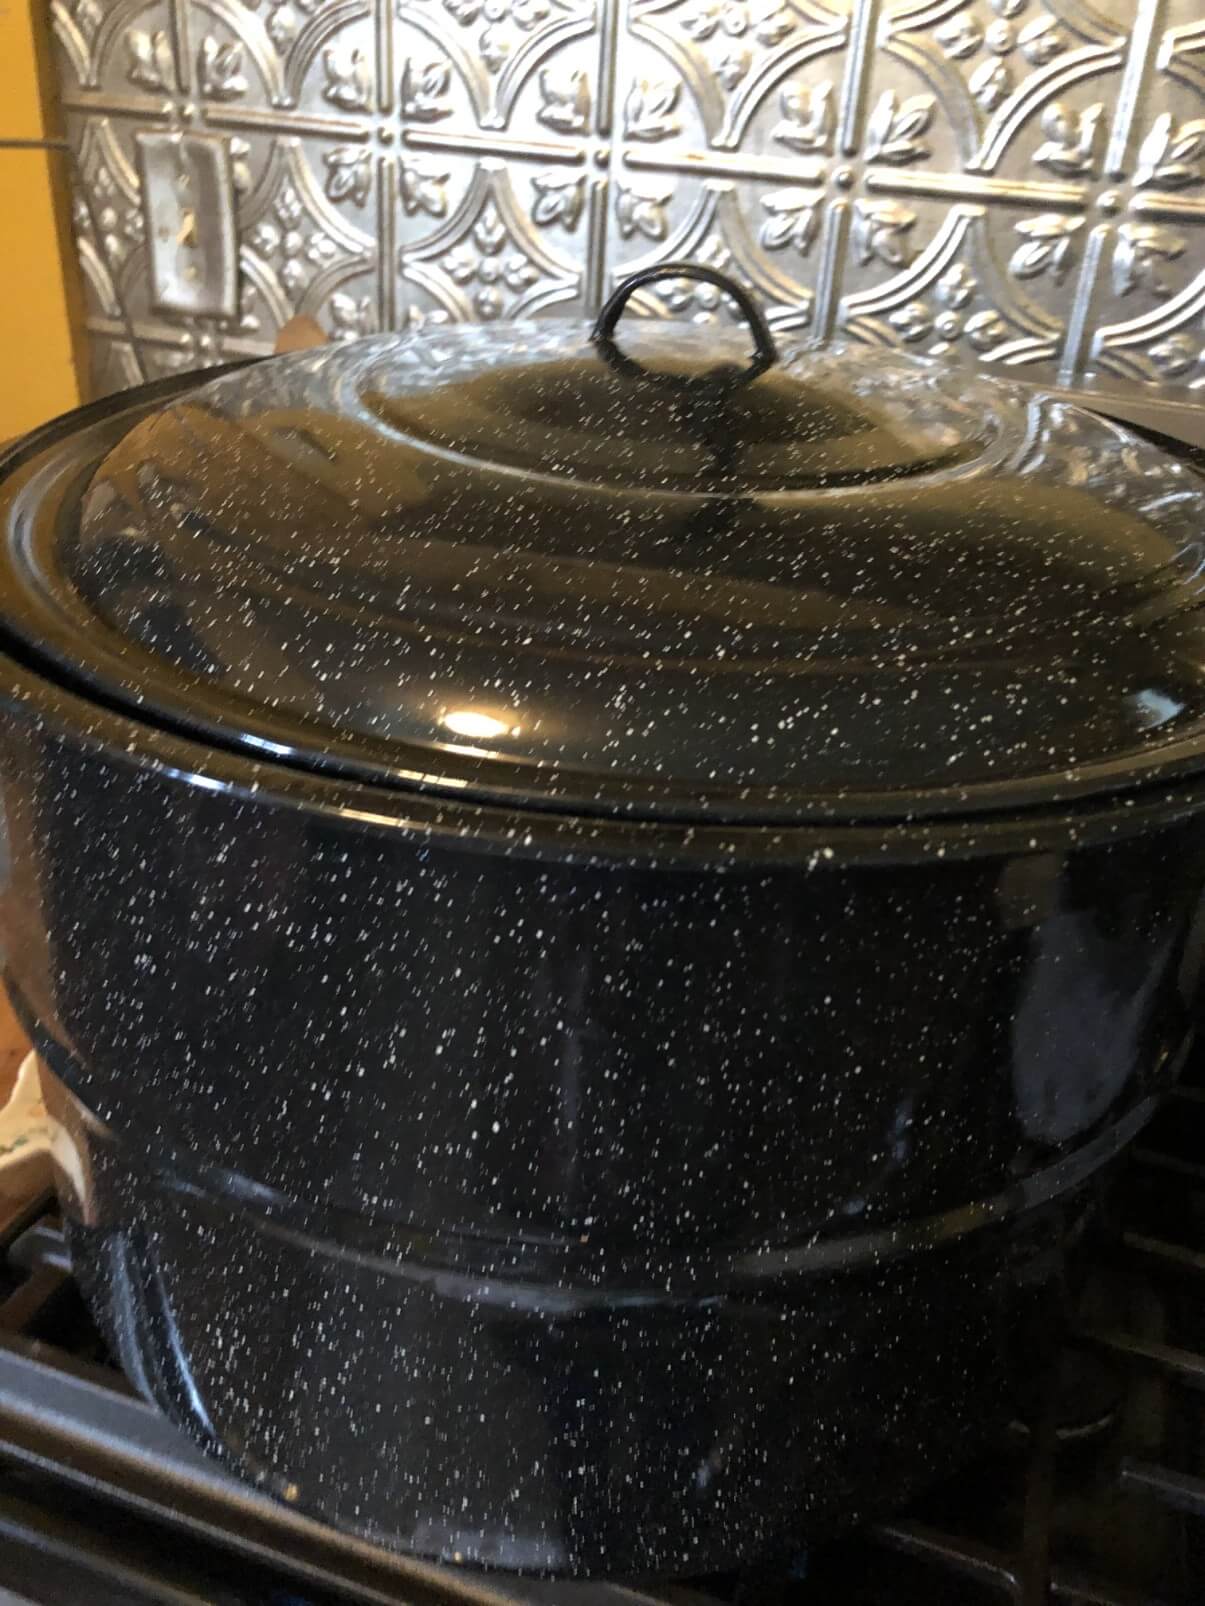 water bath canner on stove